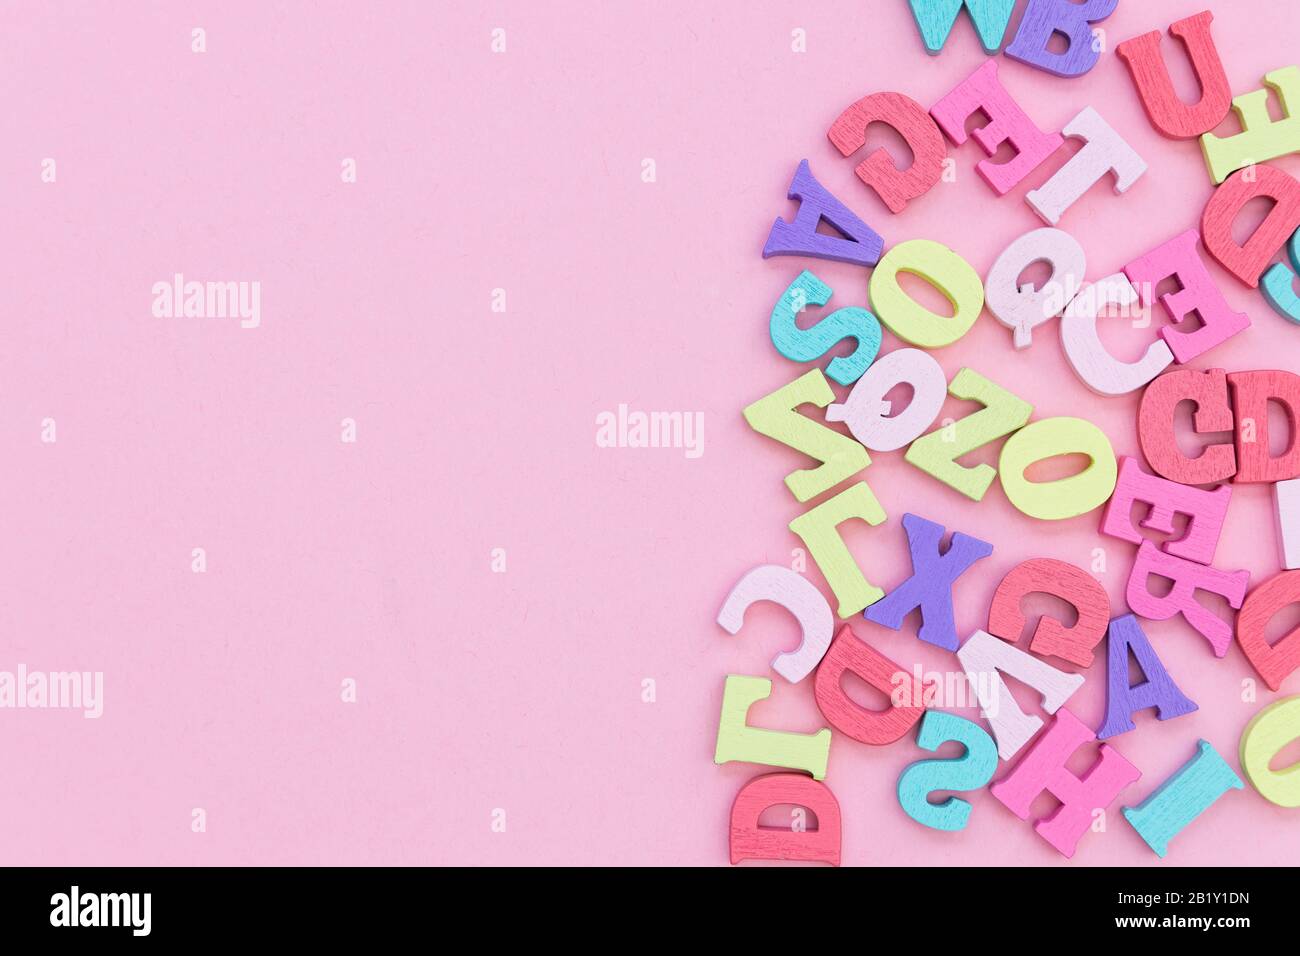 Alphabet wooden letters abstract on pink color background Stock Photo